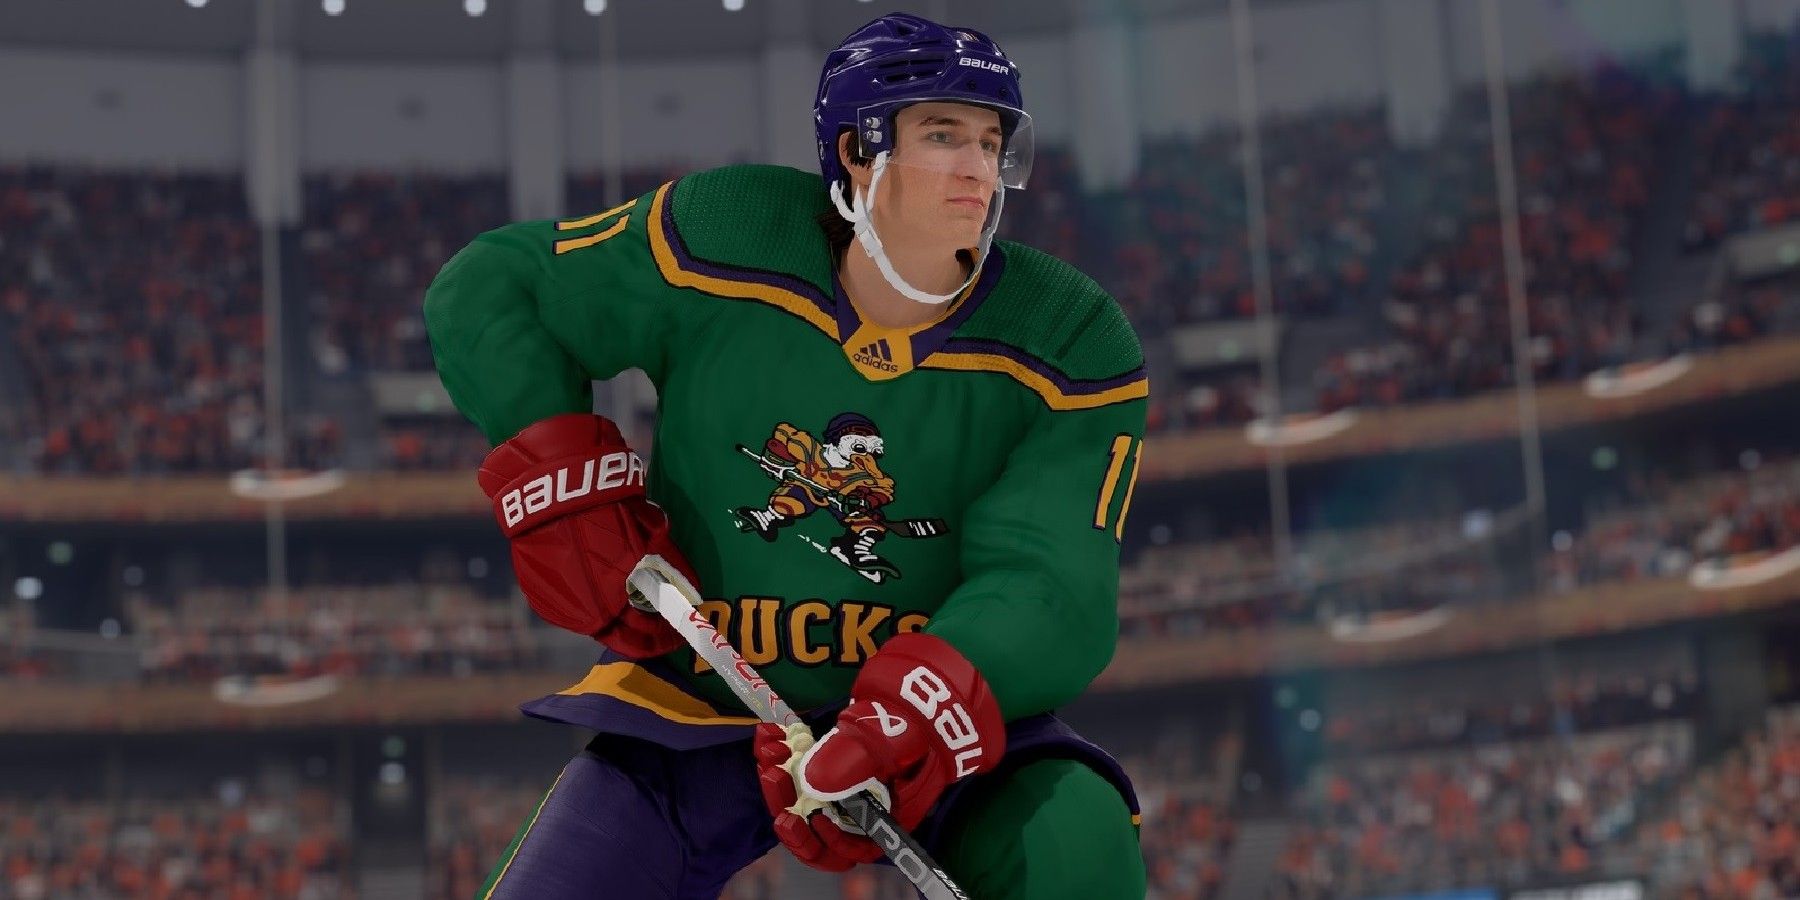 Check out the new Anaheim Ducks' Mighty Duck-themed jersey